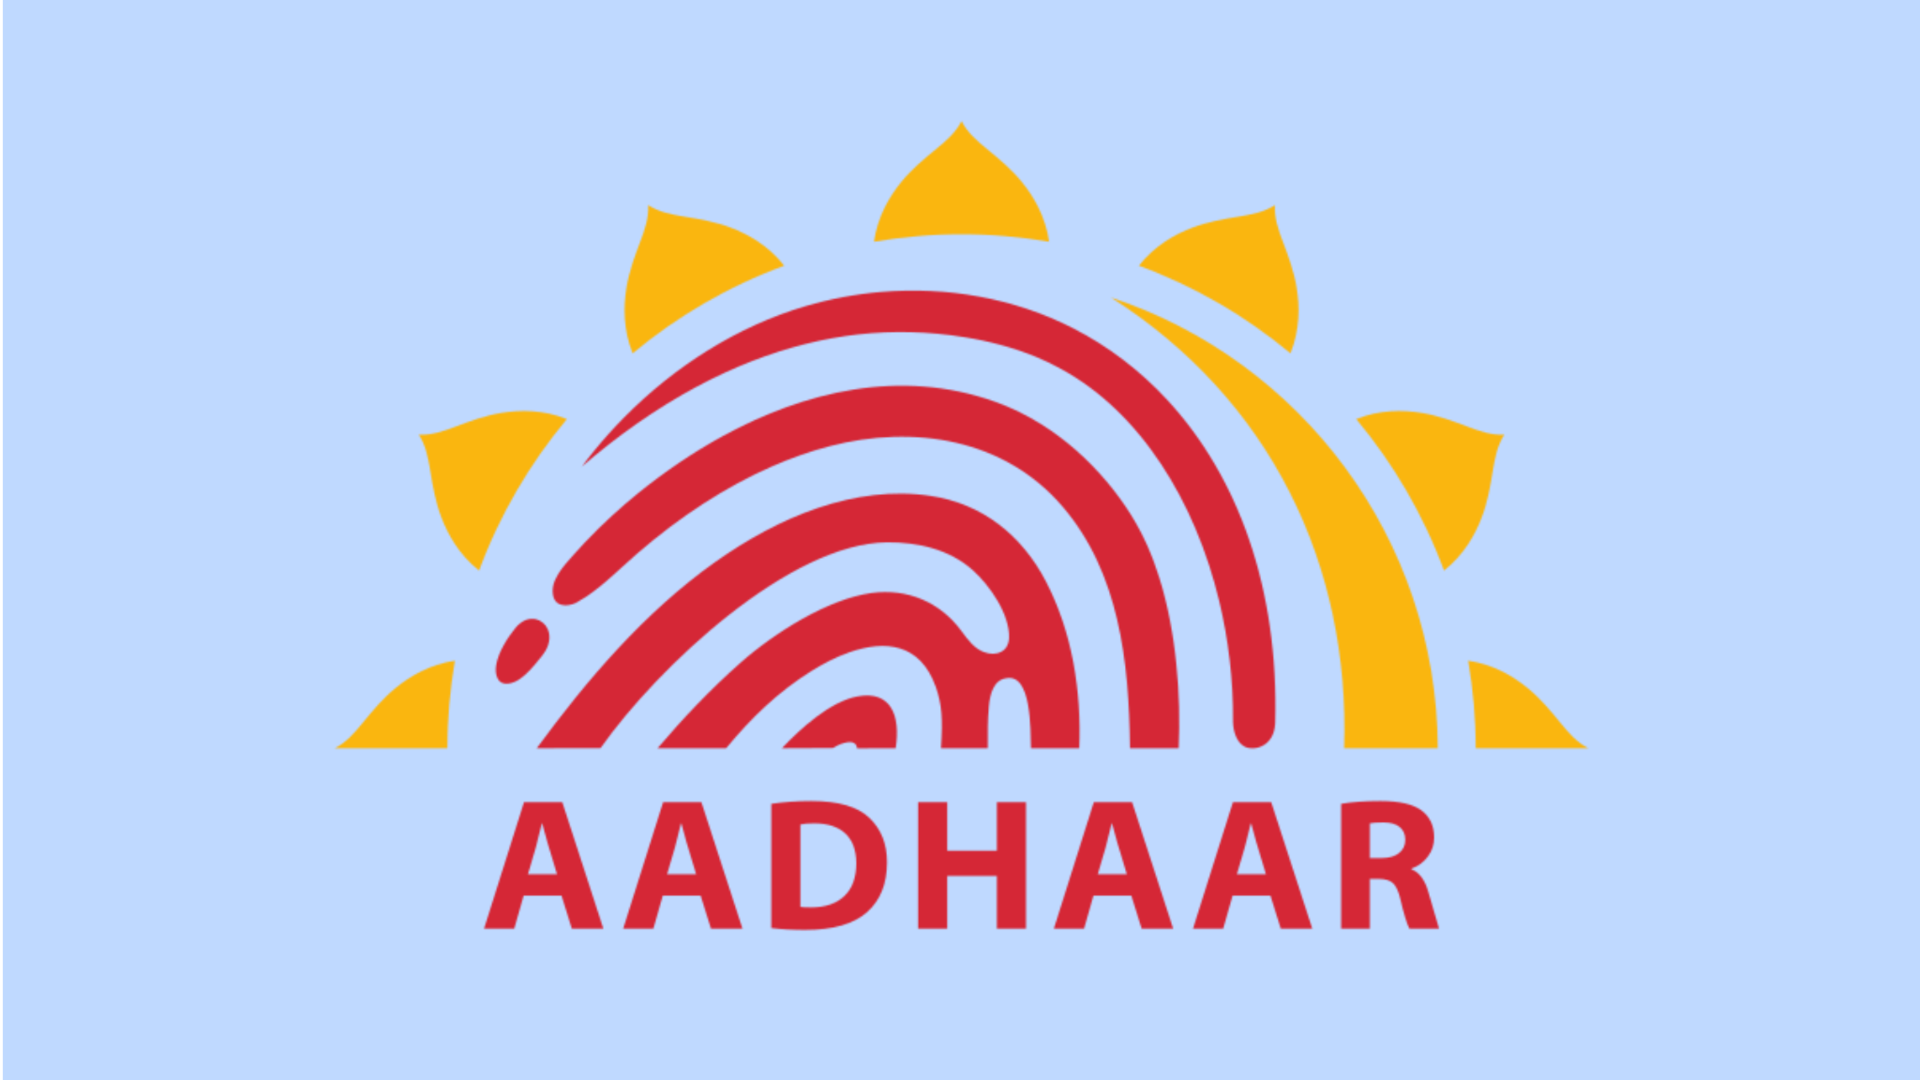 How to update name and address on your Aadhaar card